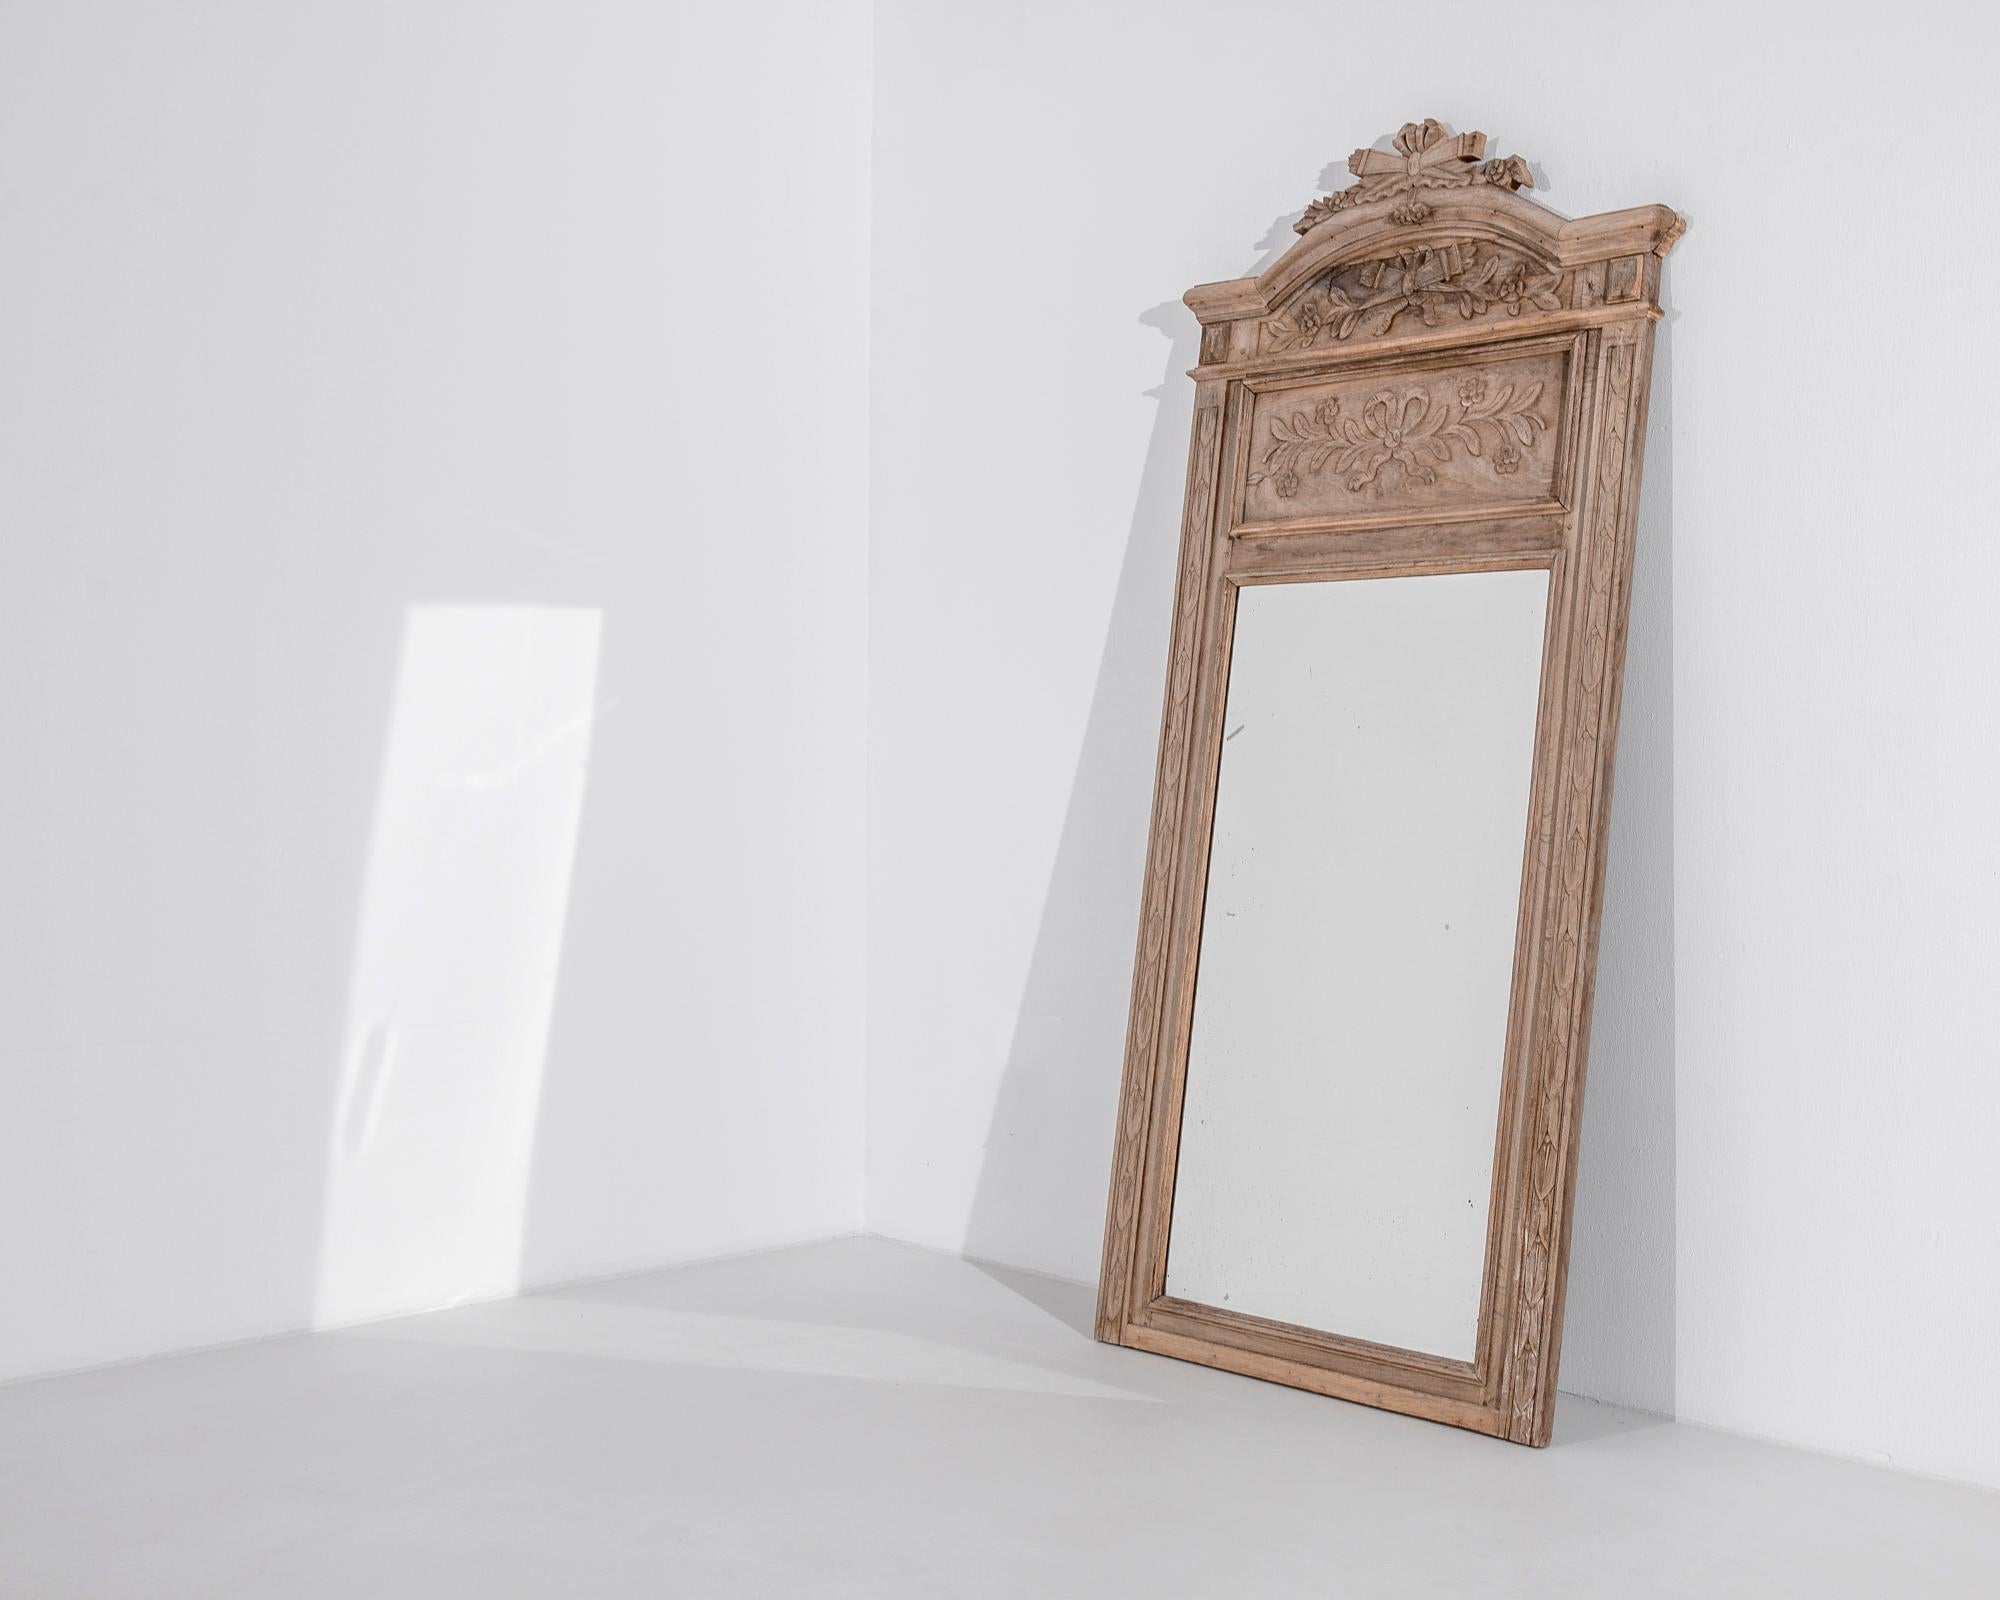 An oak floor mirror from Belgium, circa 1910, crowned by a majestic arch. Carved garlands of leaves and flowers tied with flowing ribbons give a verdant baroque touch. The rich russet tone of the oak, restored to a natural finish, gives a harmonious